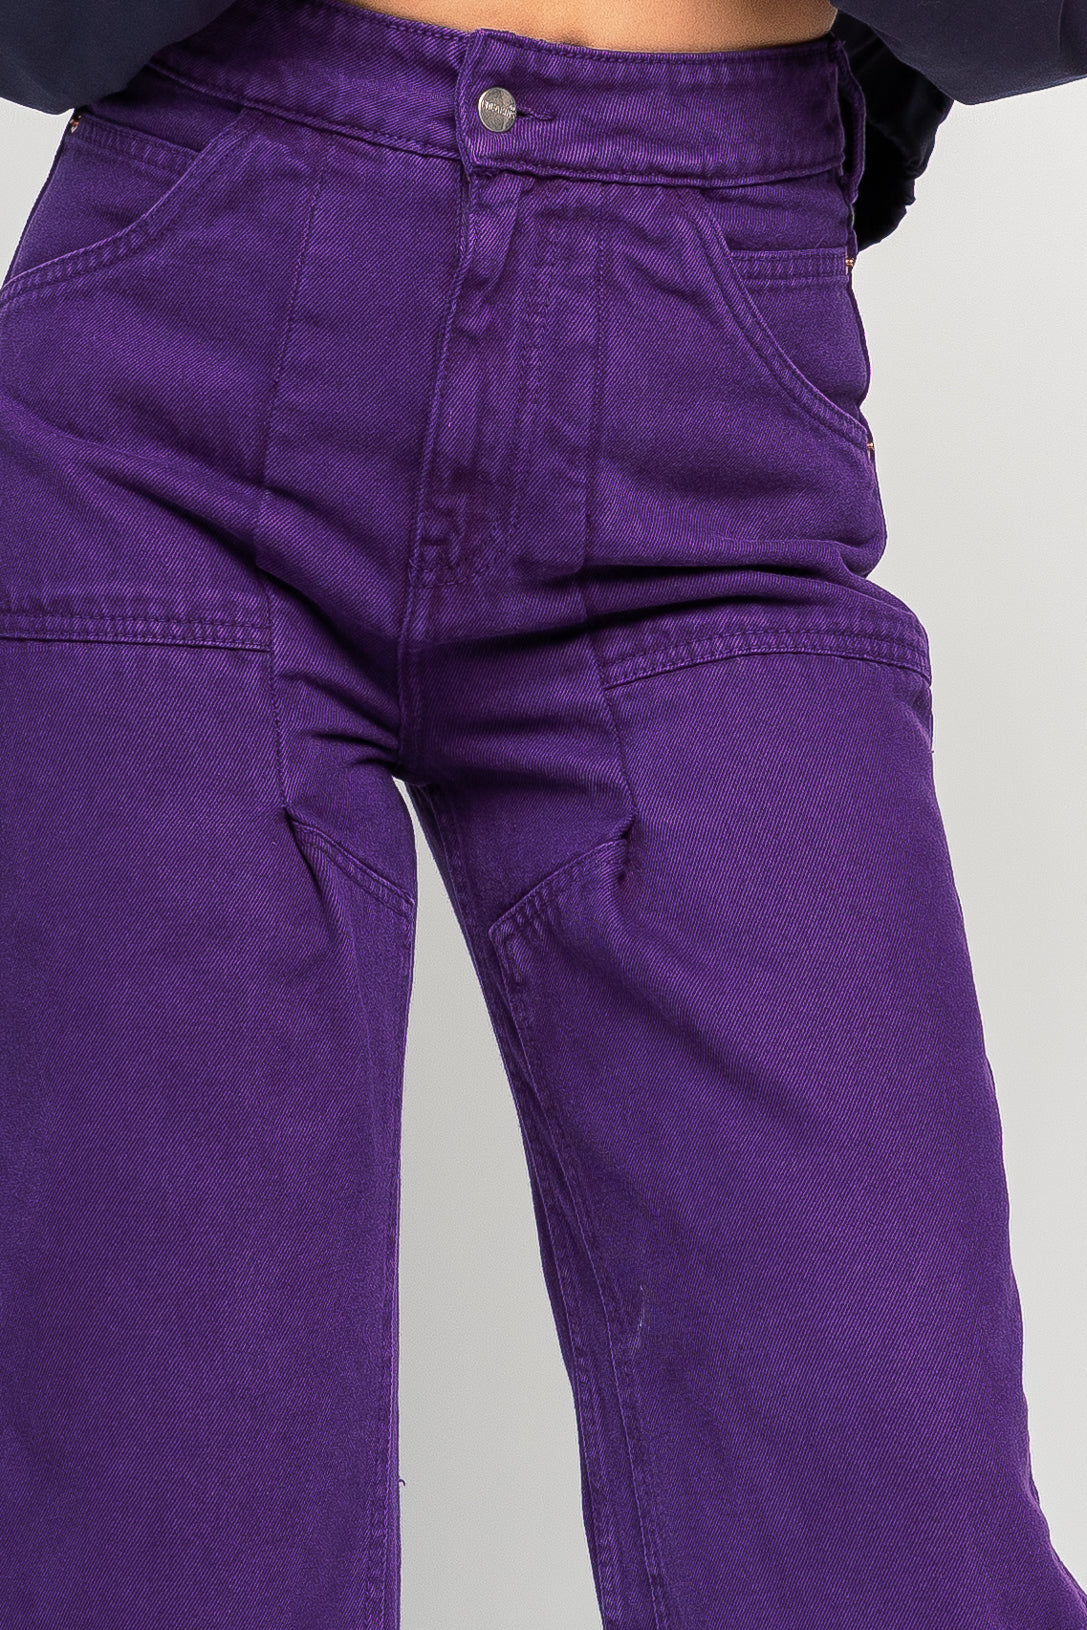 VIOLET PANELLED STRAIGHT JEANS